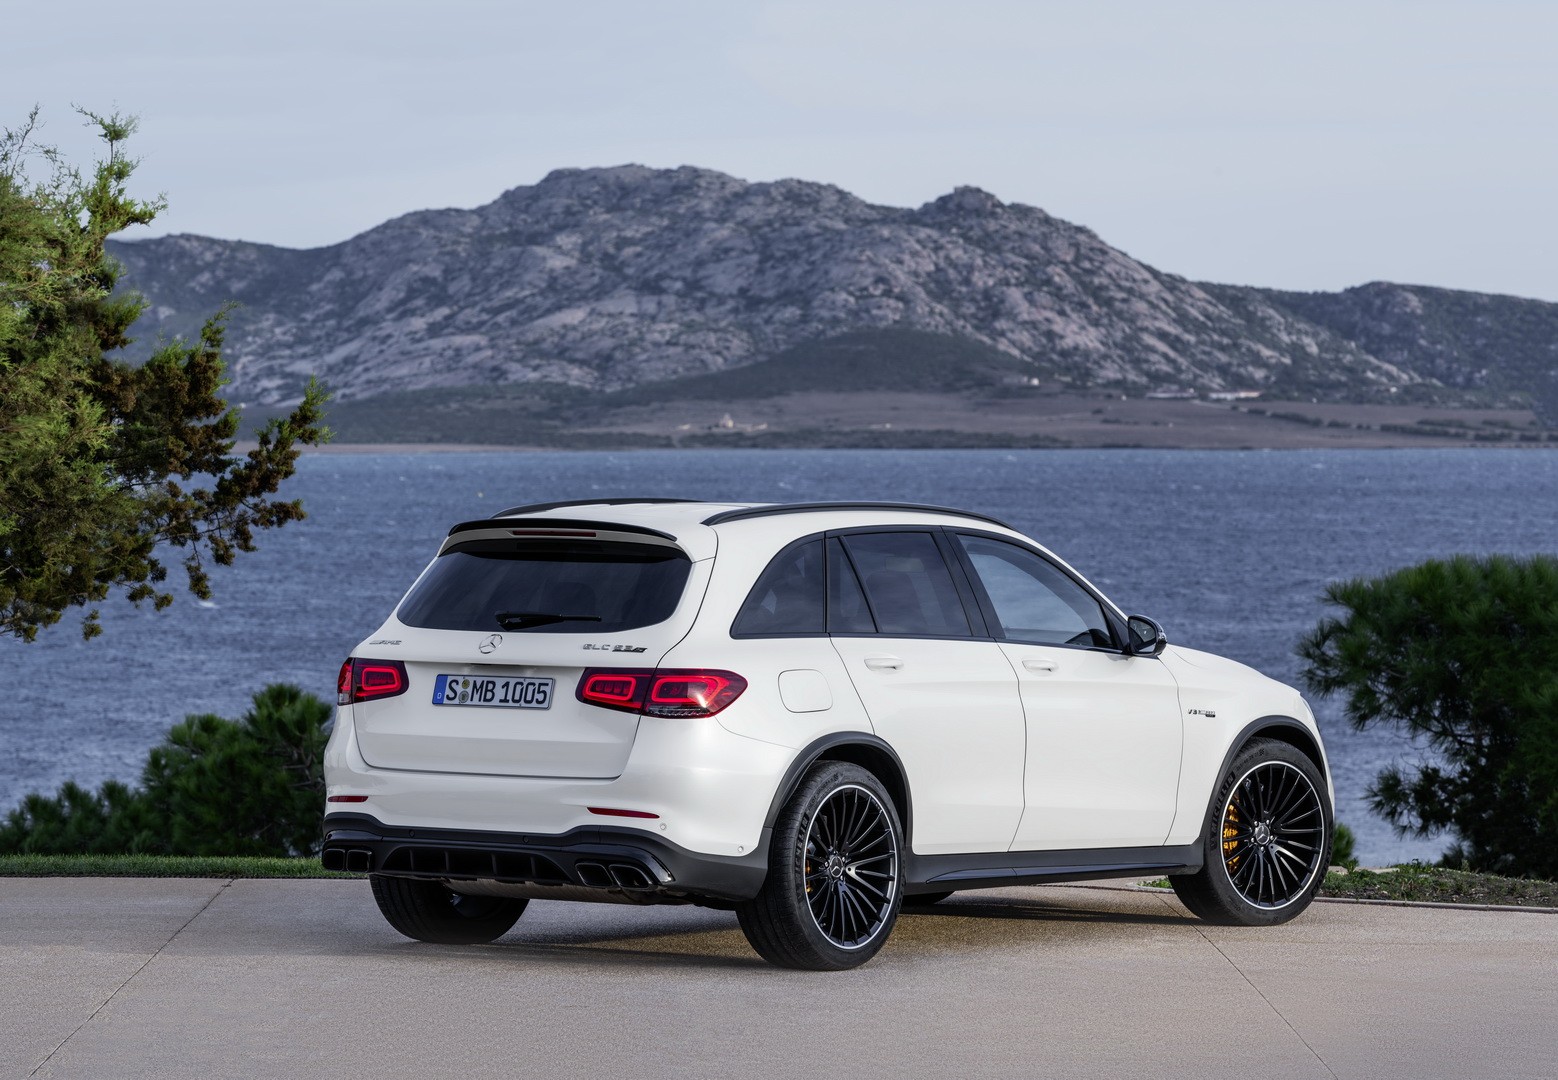 2022-mercedes-amg-glc-63-s-joins-us-range-with-503-hp-will-hit-60-mph-in-36s-3.jpg